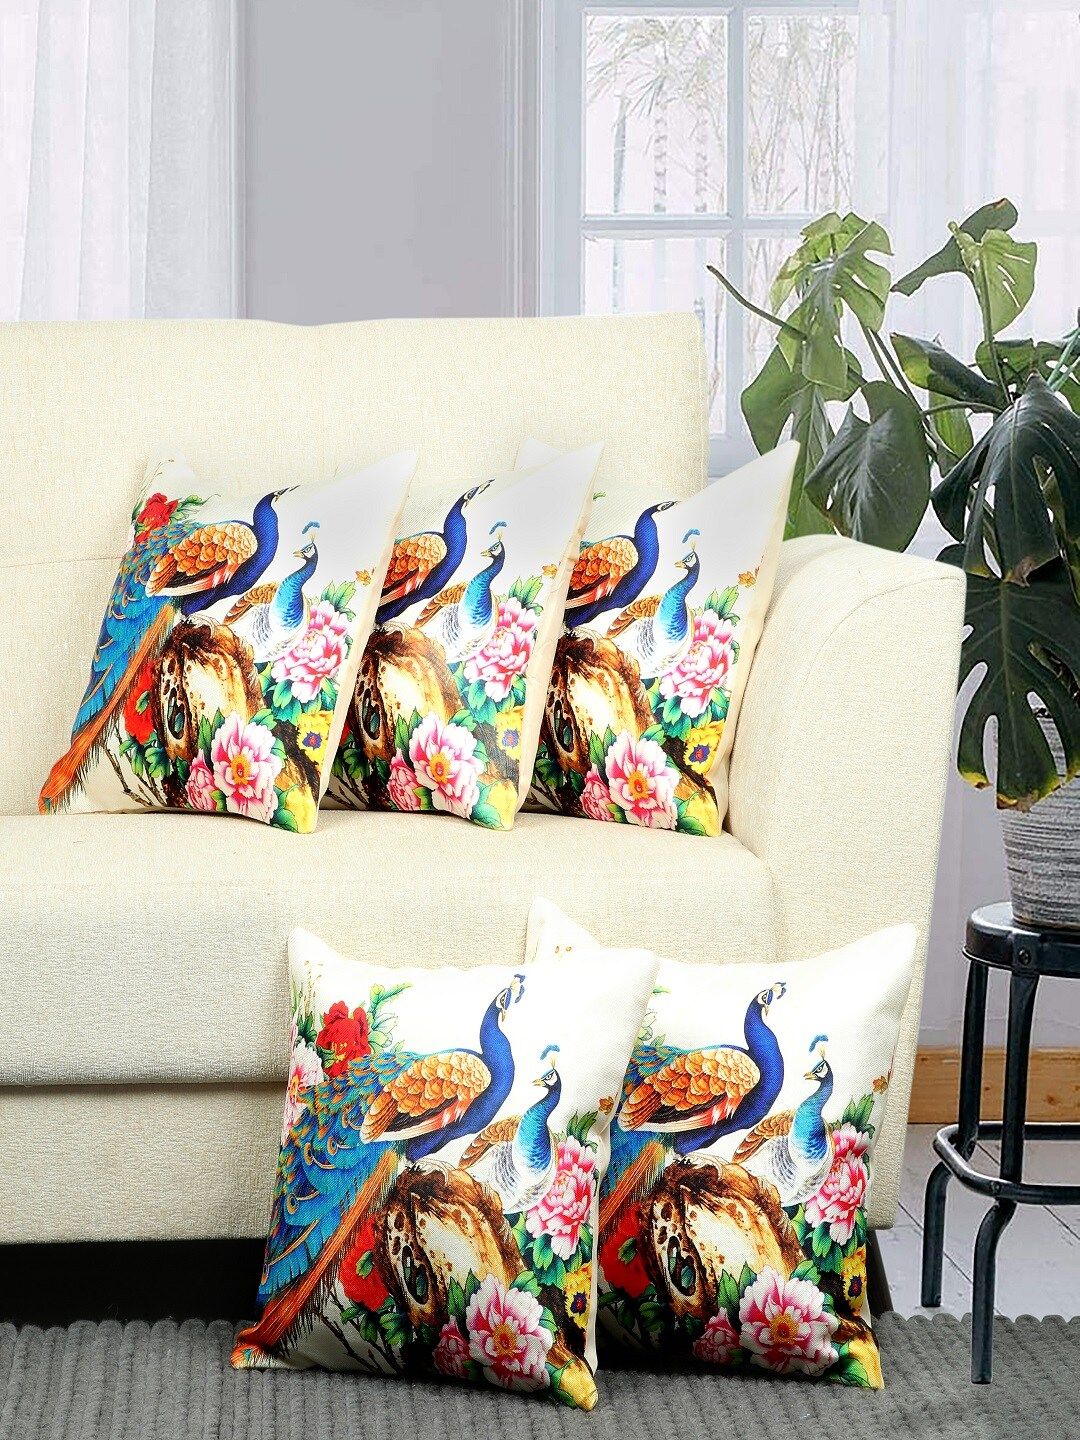 BELLA TRUE White & Blue Set of 5 Ethnic Motifs Square Cushion Covers Price in India